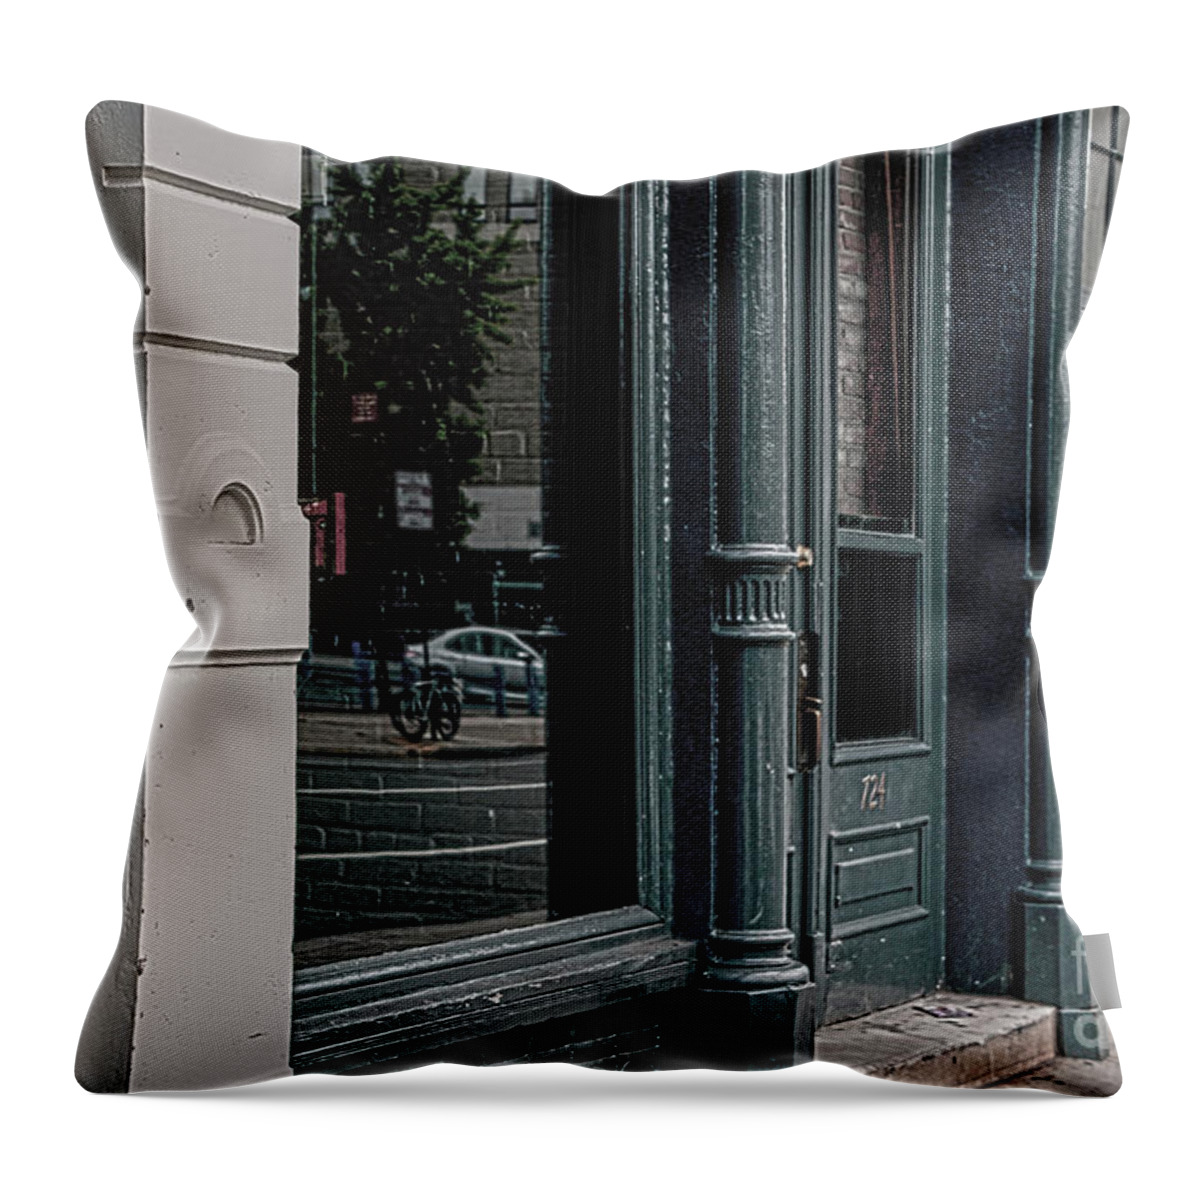 Philadelphia Throw Pillow featuring the photograph Old Building Front by Sandy Moulder